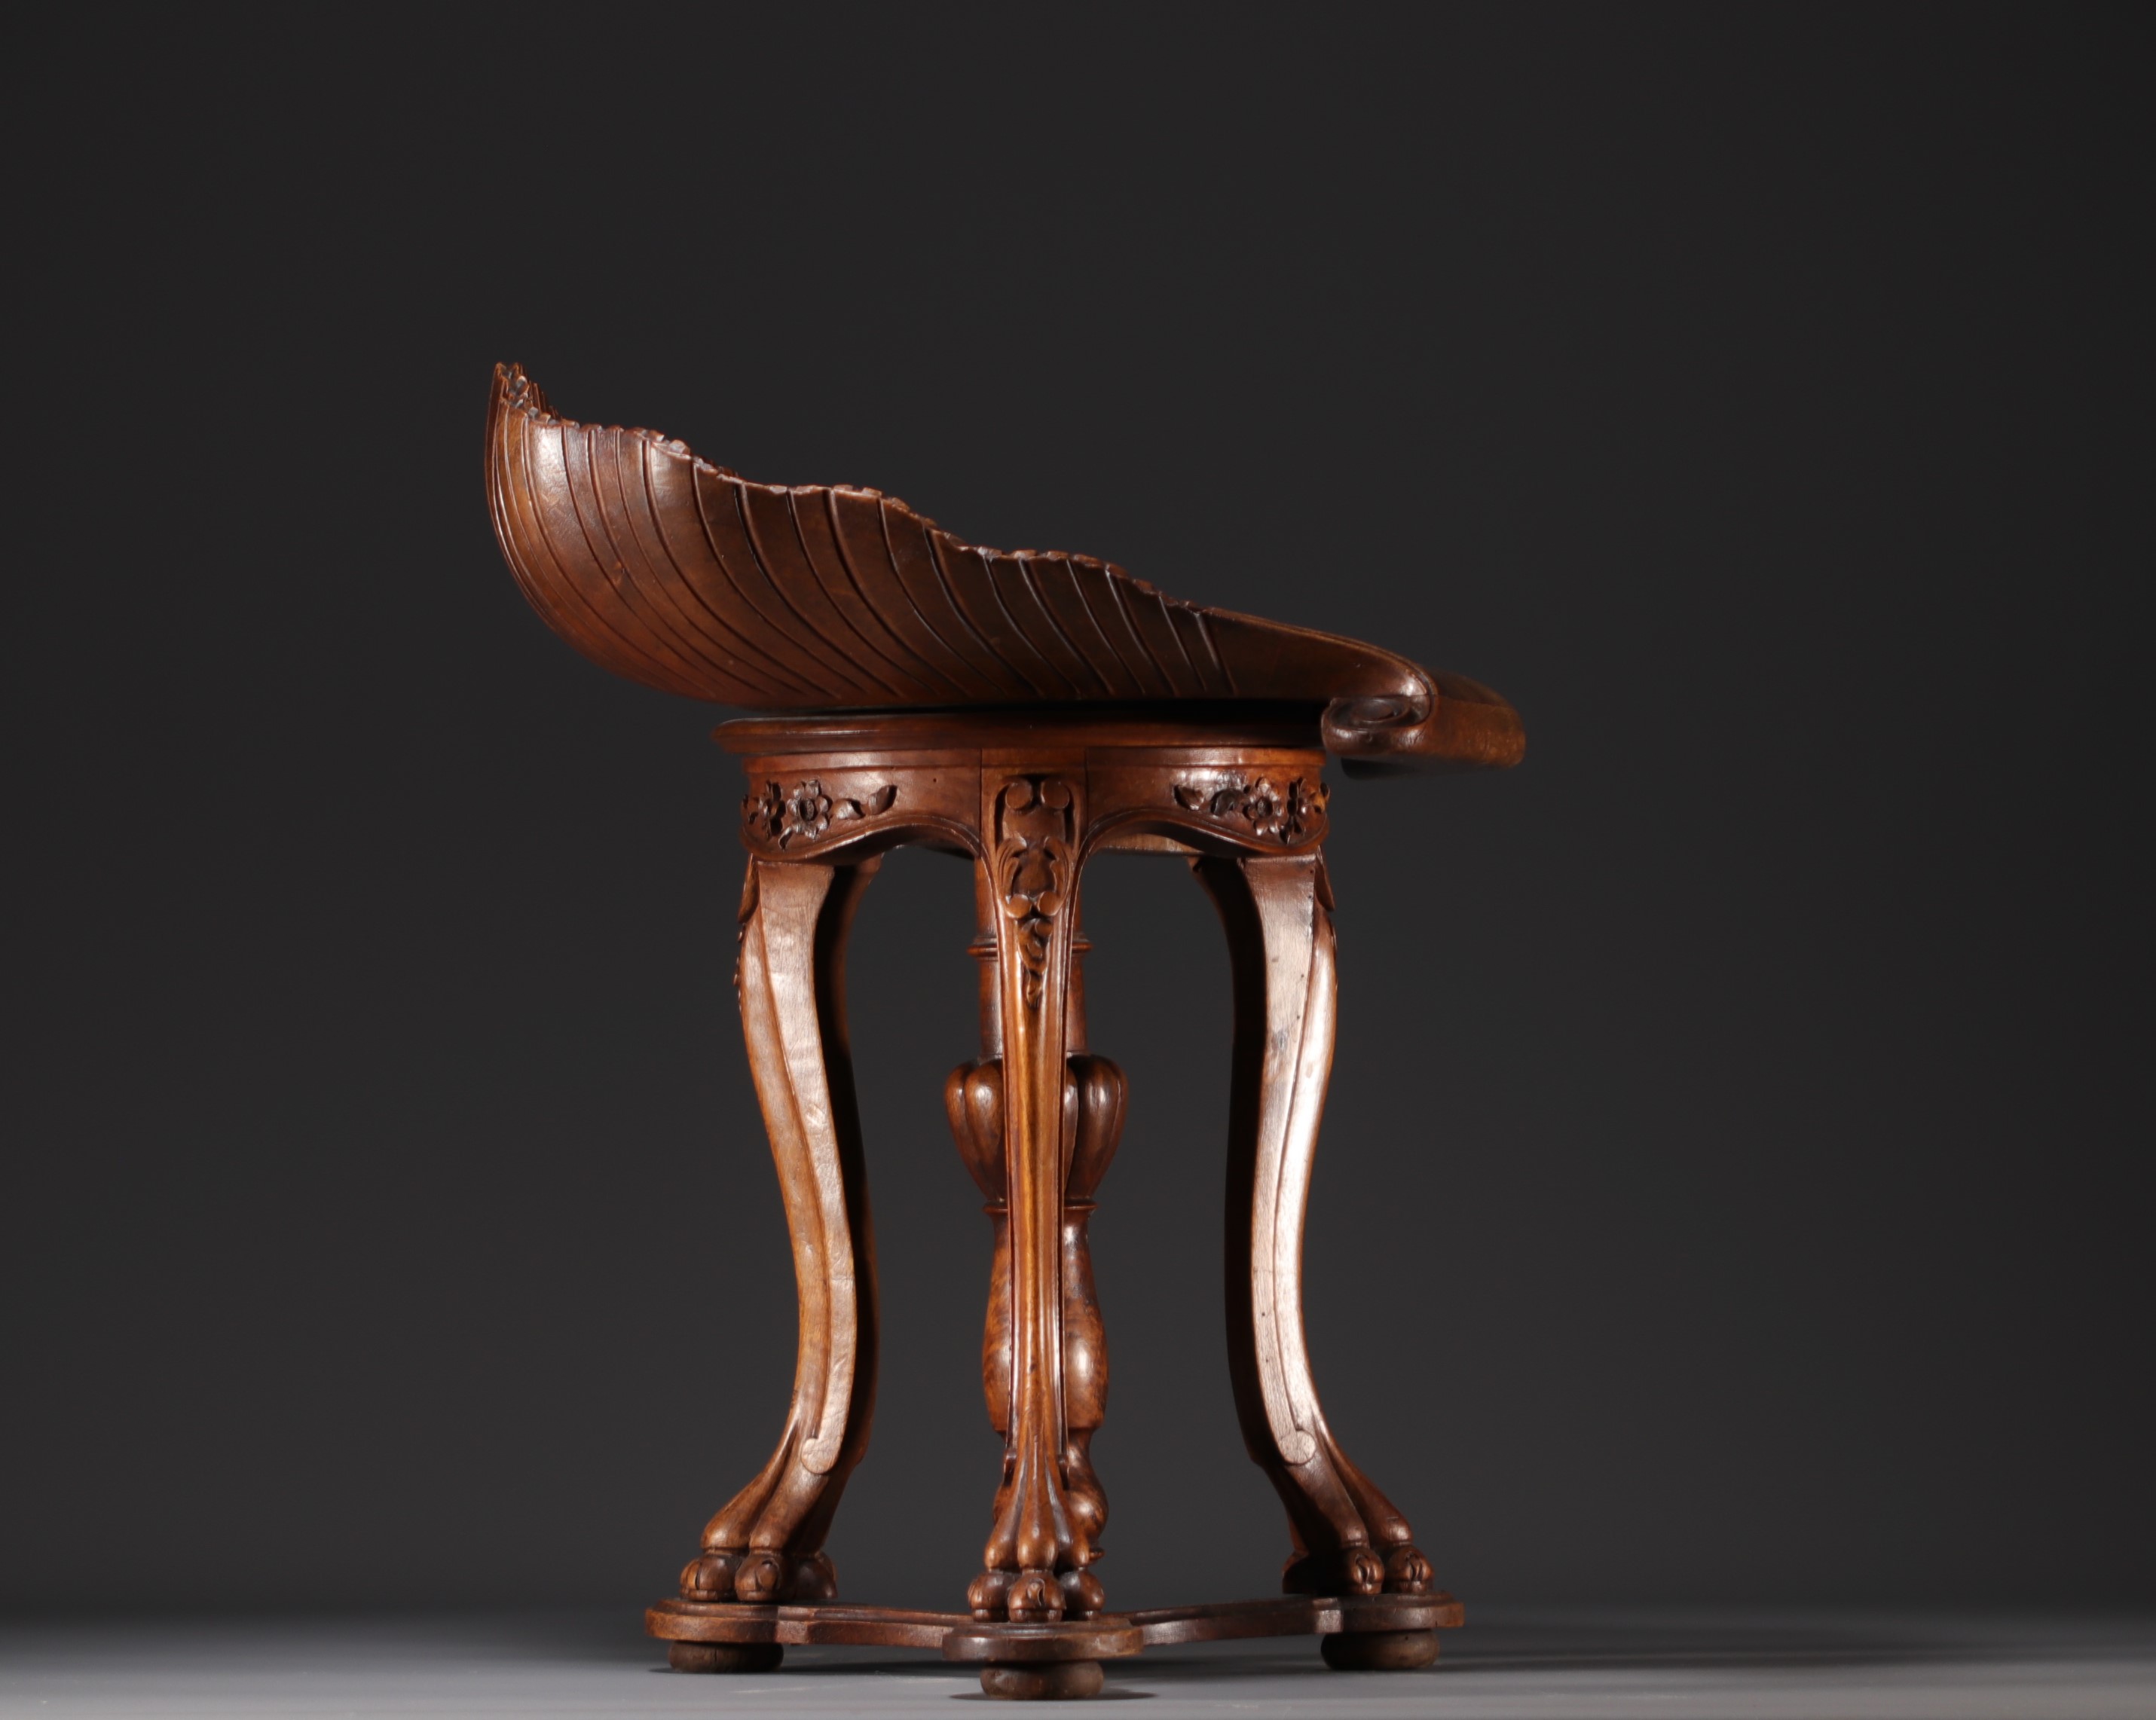 Venetian "Grotto" pianist's or harpist's chair in carved walnut representing a shell on a tripod bas - Image 2 of 3